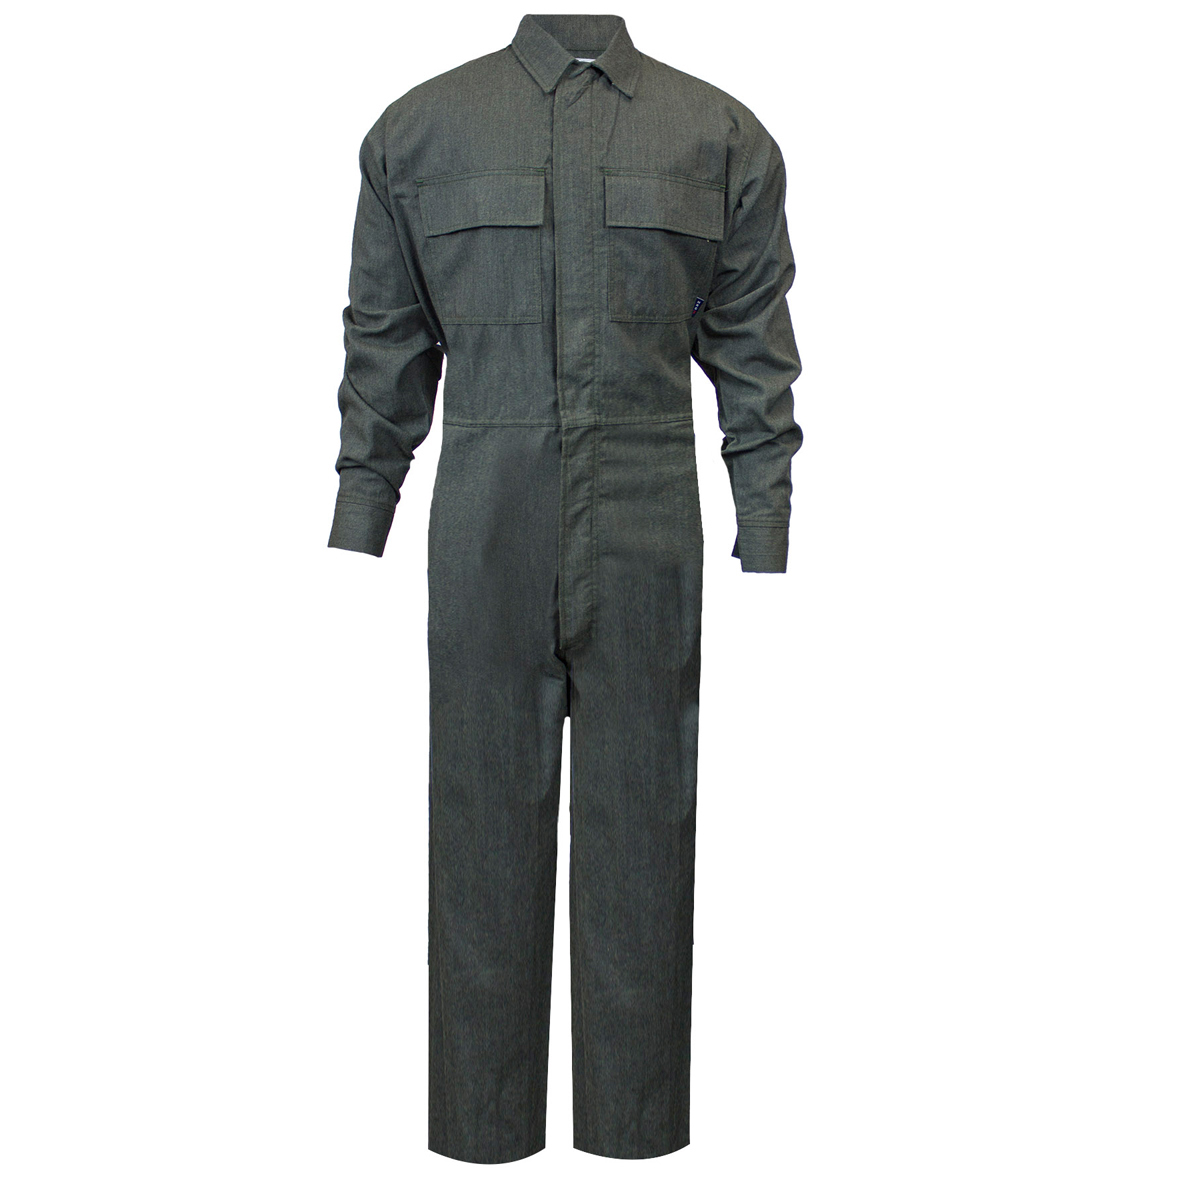 National Safety Apparel Large Regular Green OPF Blend Twill CARBON ARMOUR™ Welding Flame Resistant Coverall With Zipper Front Cl